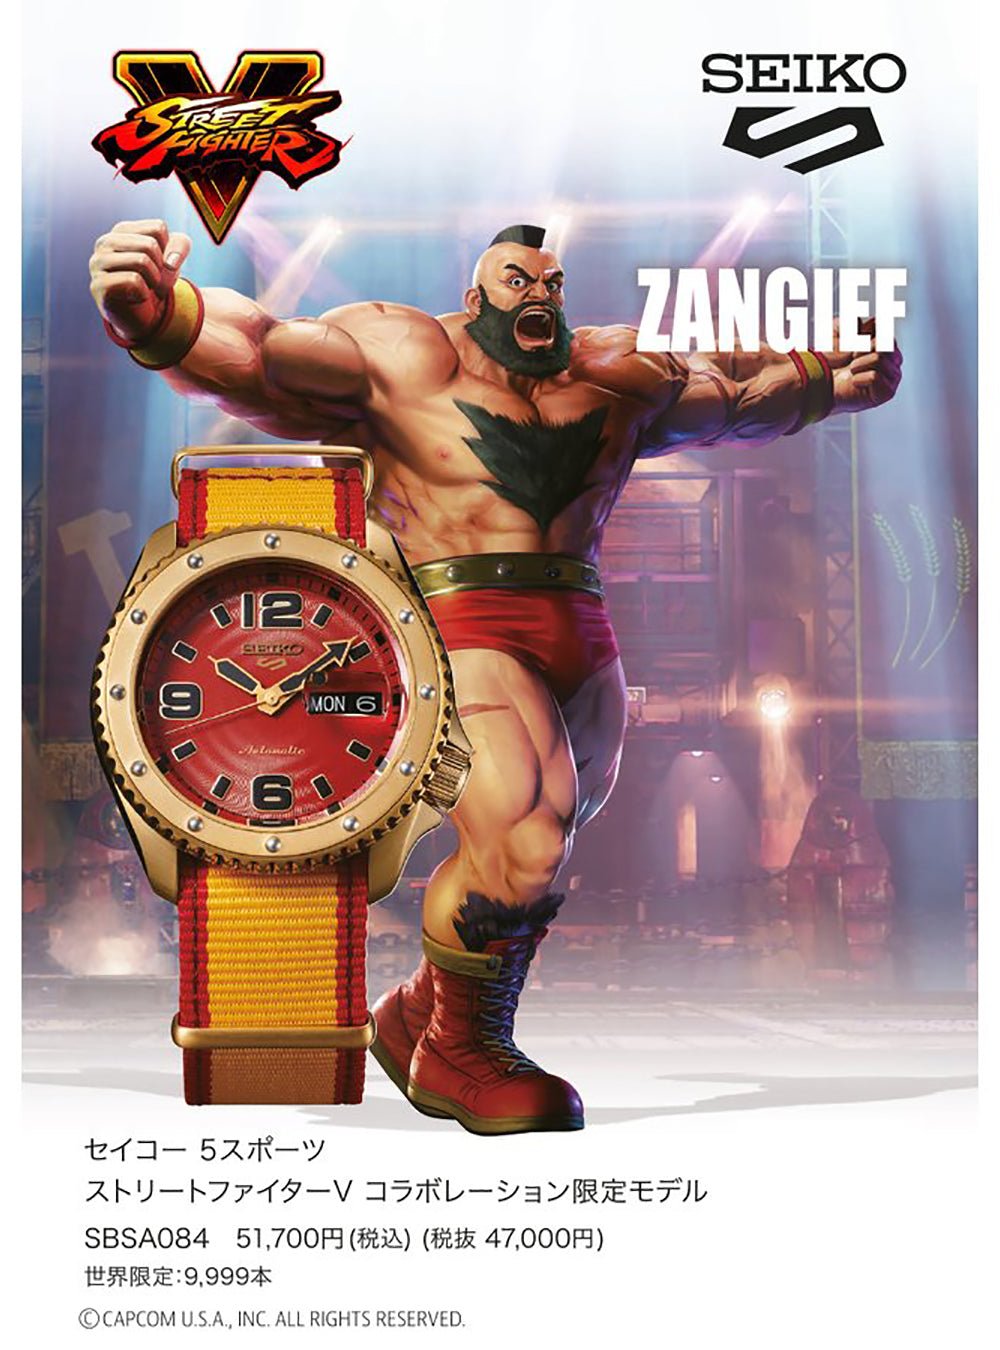 SEIKO 5 SPORTS STREET FIGHTER V LIMITED EDITION ZANGIEF MODEL SBSA084 MADE  IN JAPAN JDM